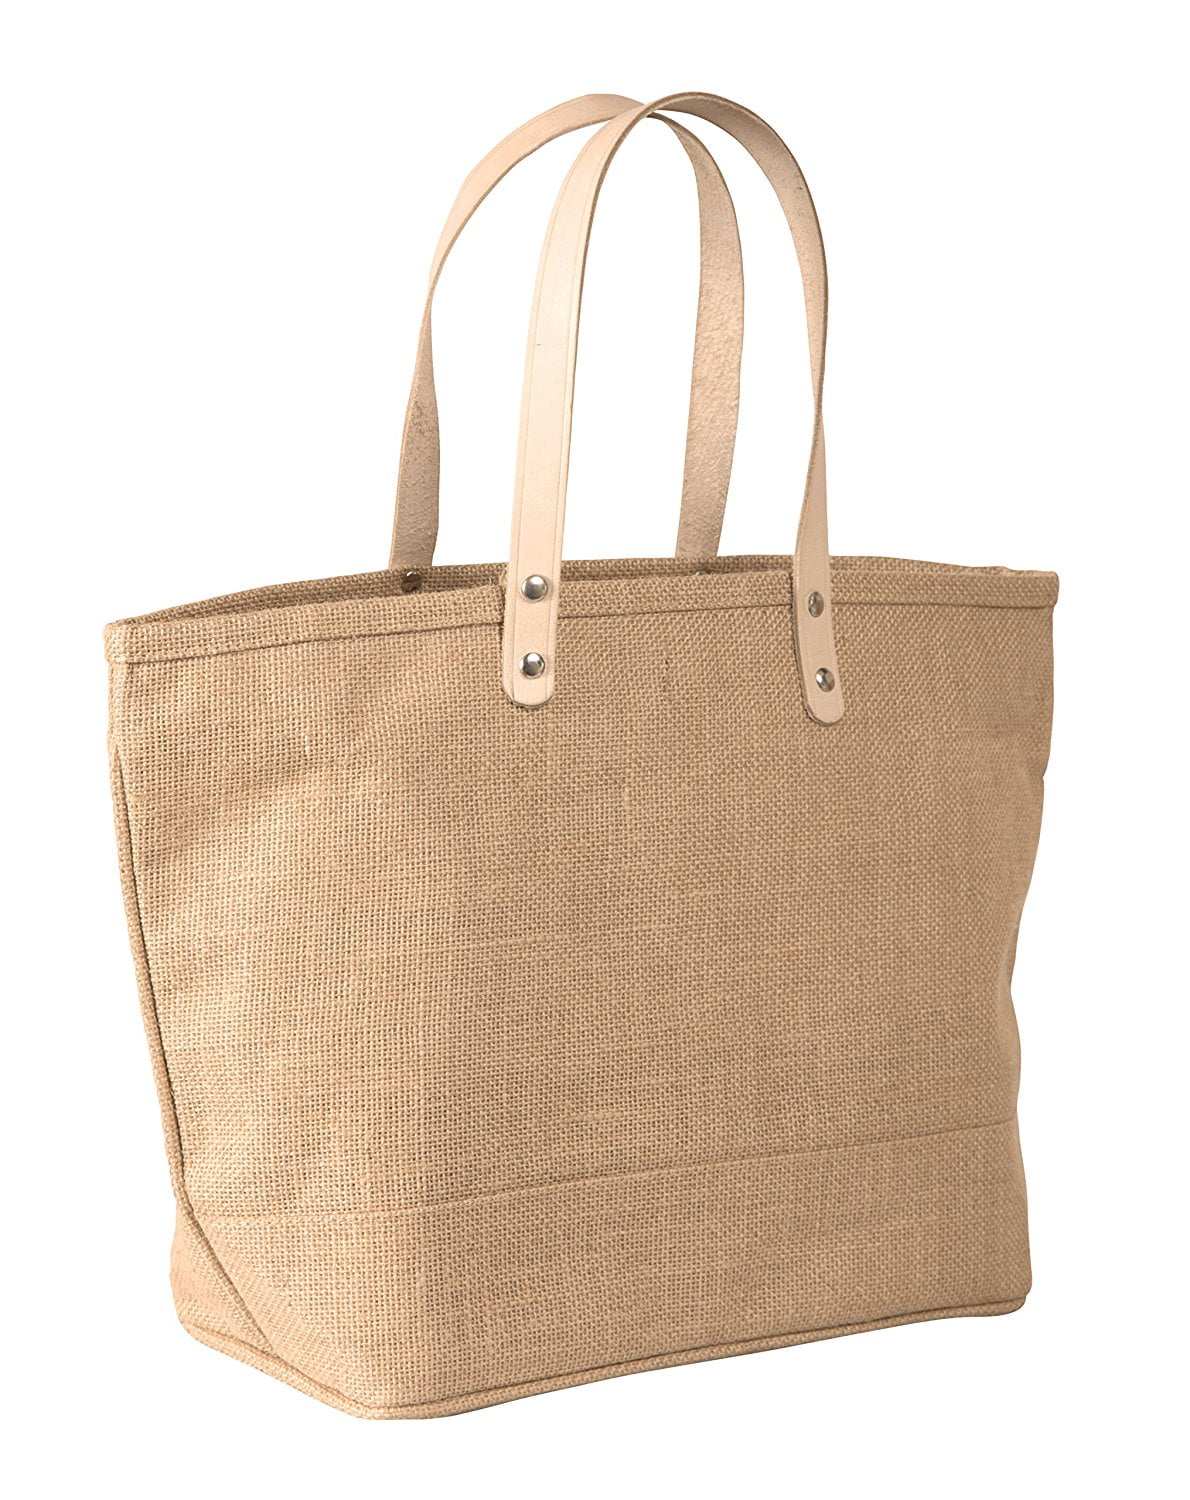 Small Jute Tote bag with Leather Handles Size 17.25